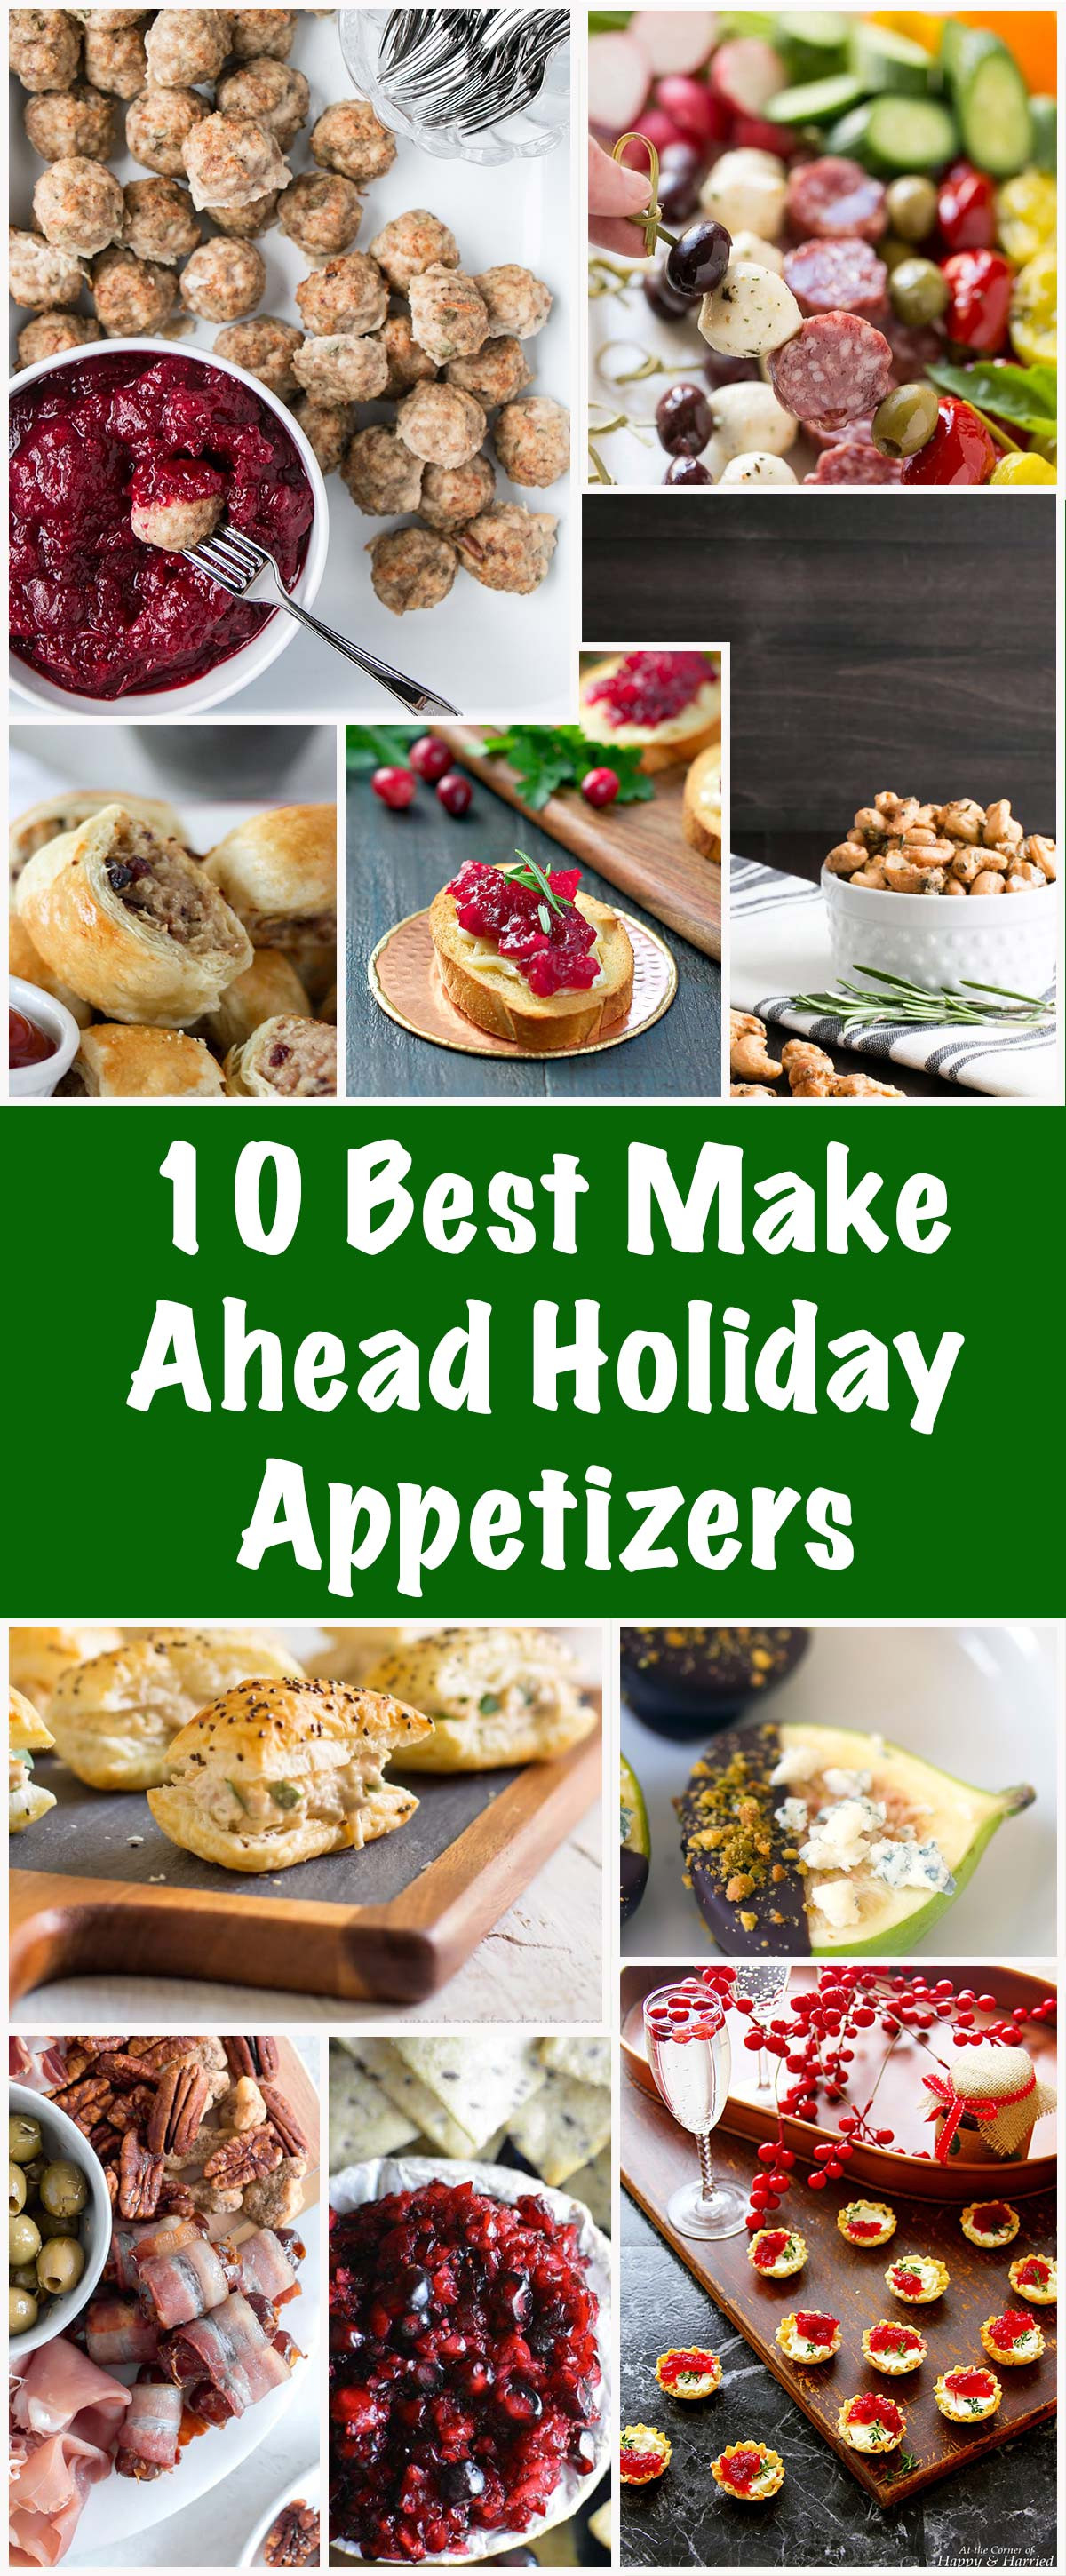 Make Ahead Christmas Appetizers
 10 Best Make Ahead Holiday Appetizers My Kitchen Love